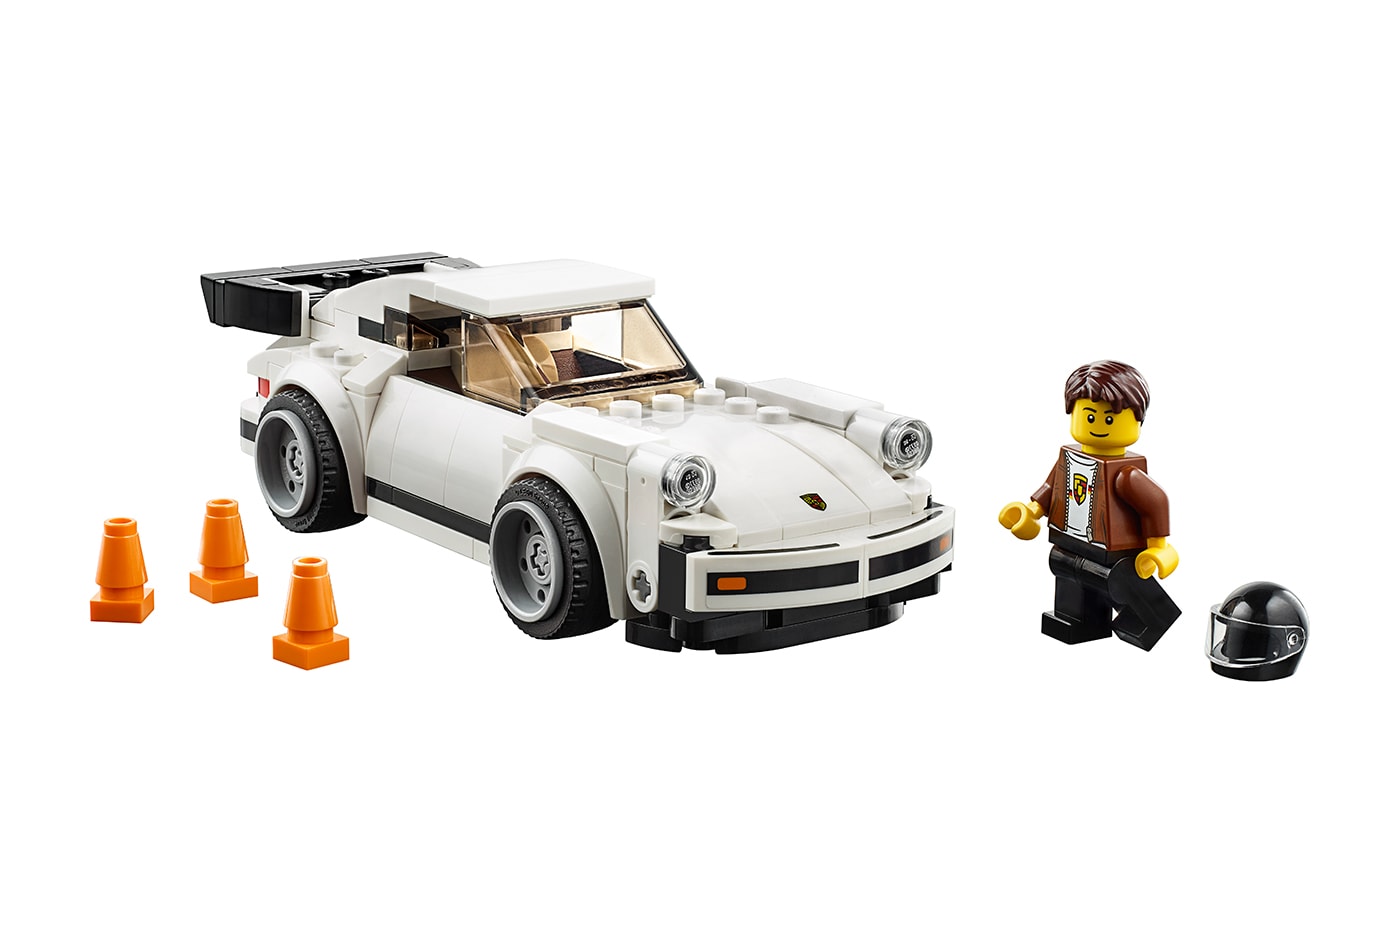 LEGO 1974 Porsche 911 Turbo 3 0 Release Info racing cars collectible toys bricks motorsport hobby building models